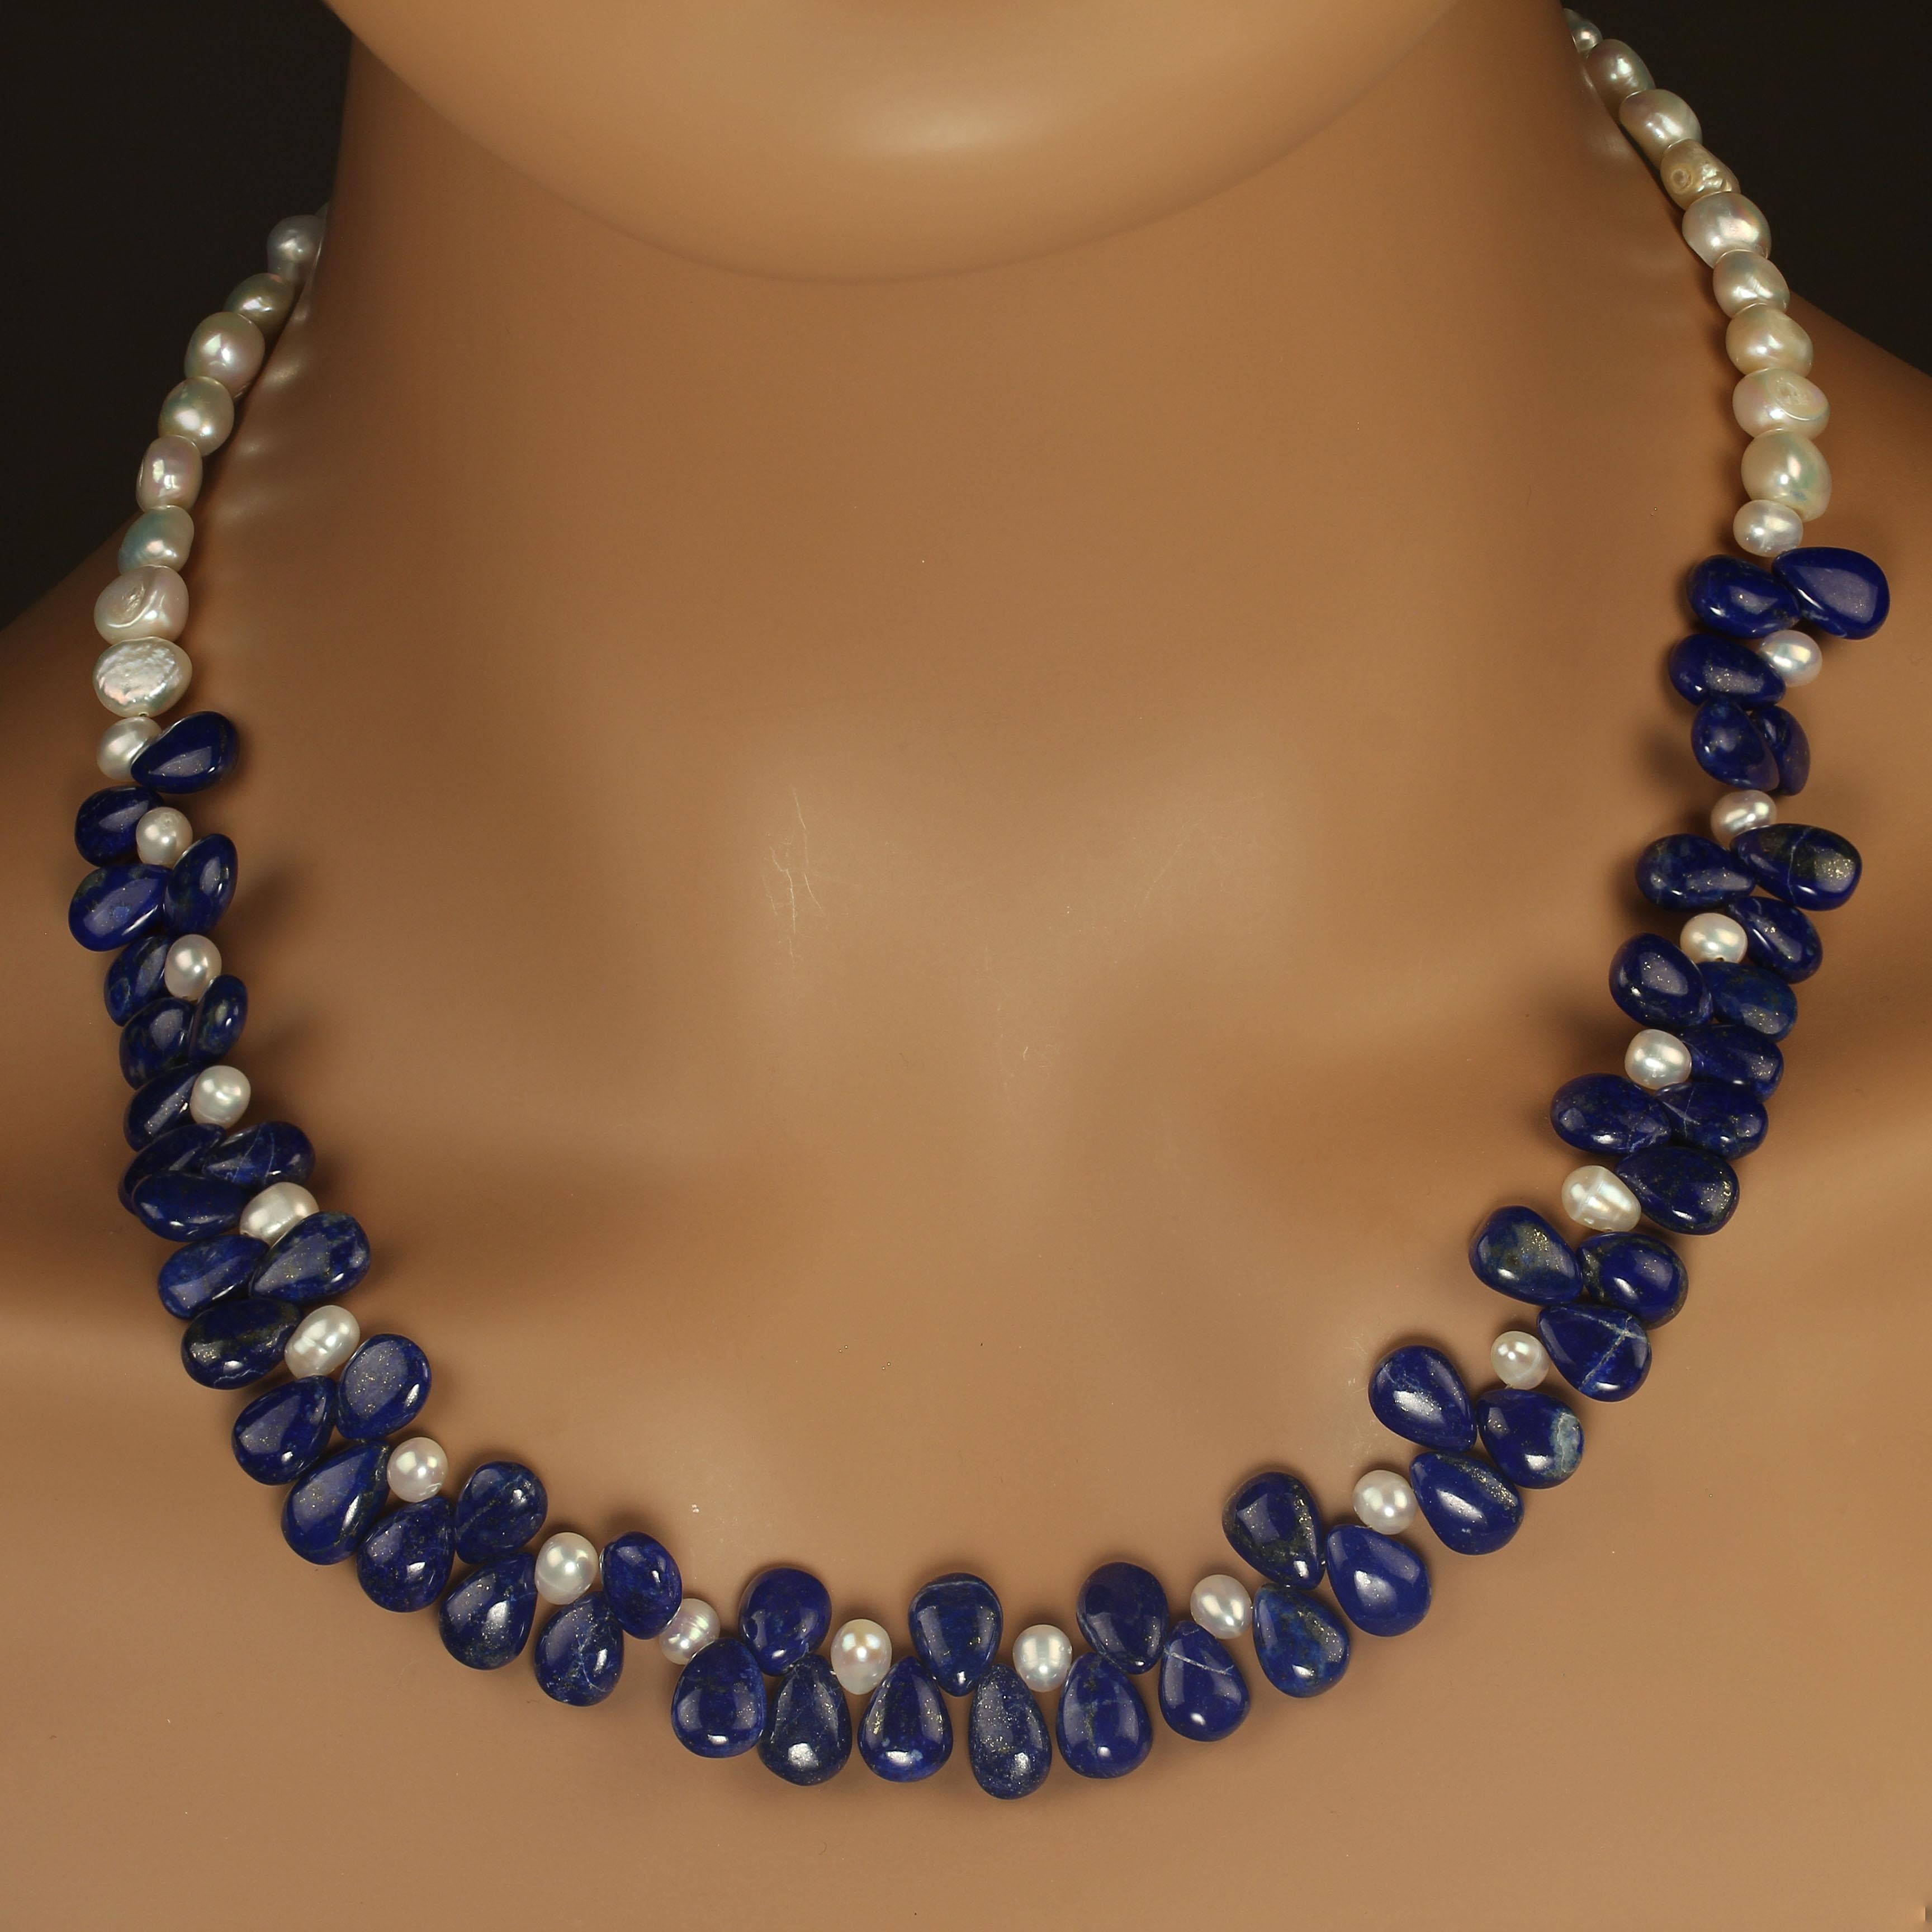 Artisan AJD 20 Inch Fascinating, Unique Lapis Lazuli Briolette and White Pearl Necklace For Sale